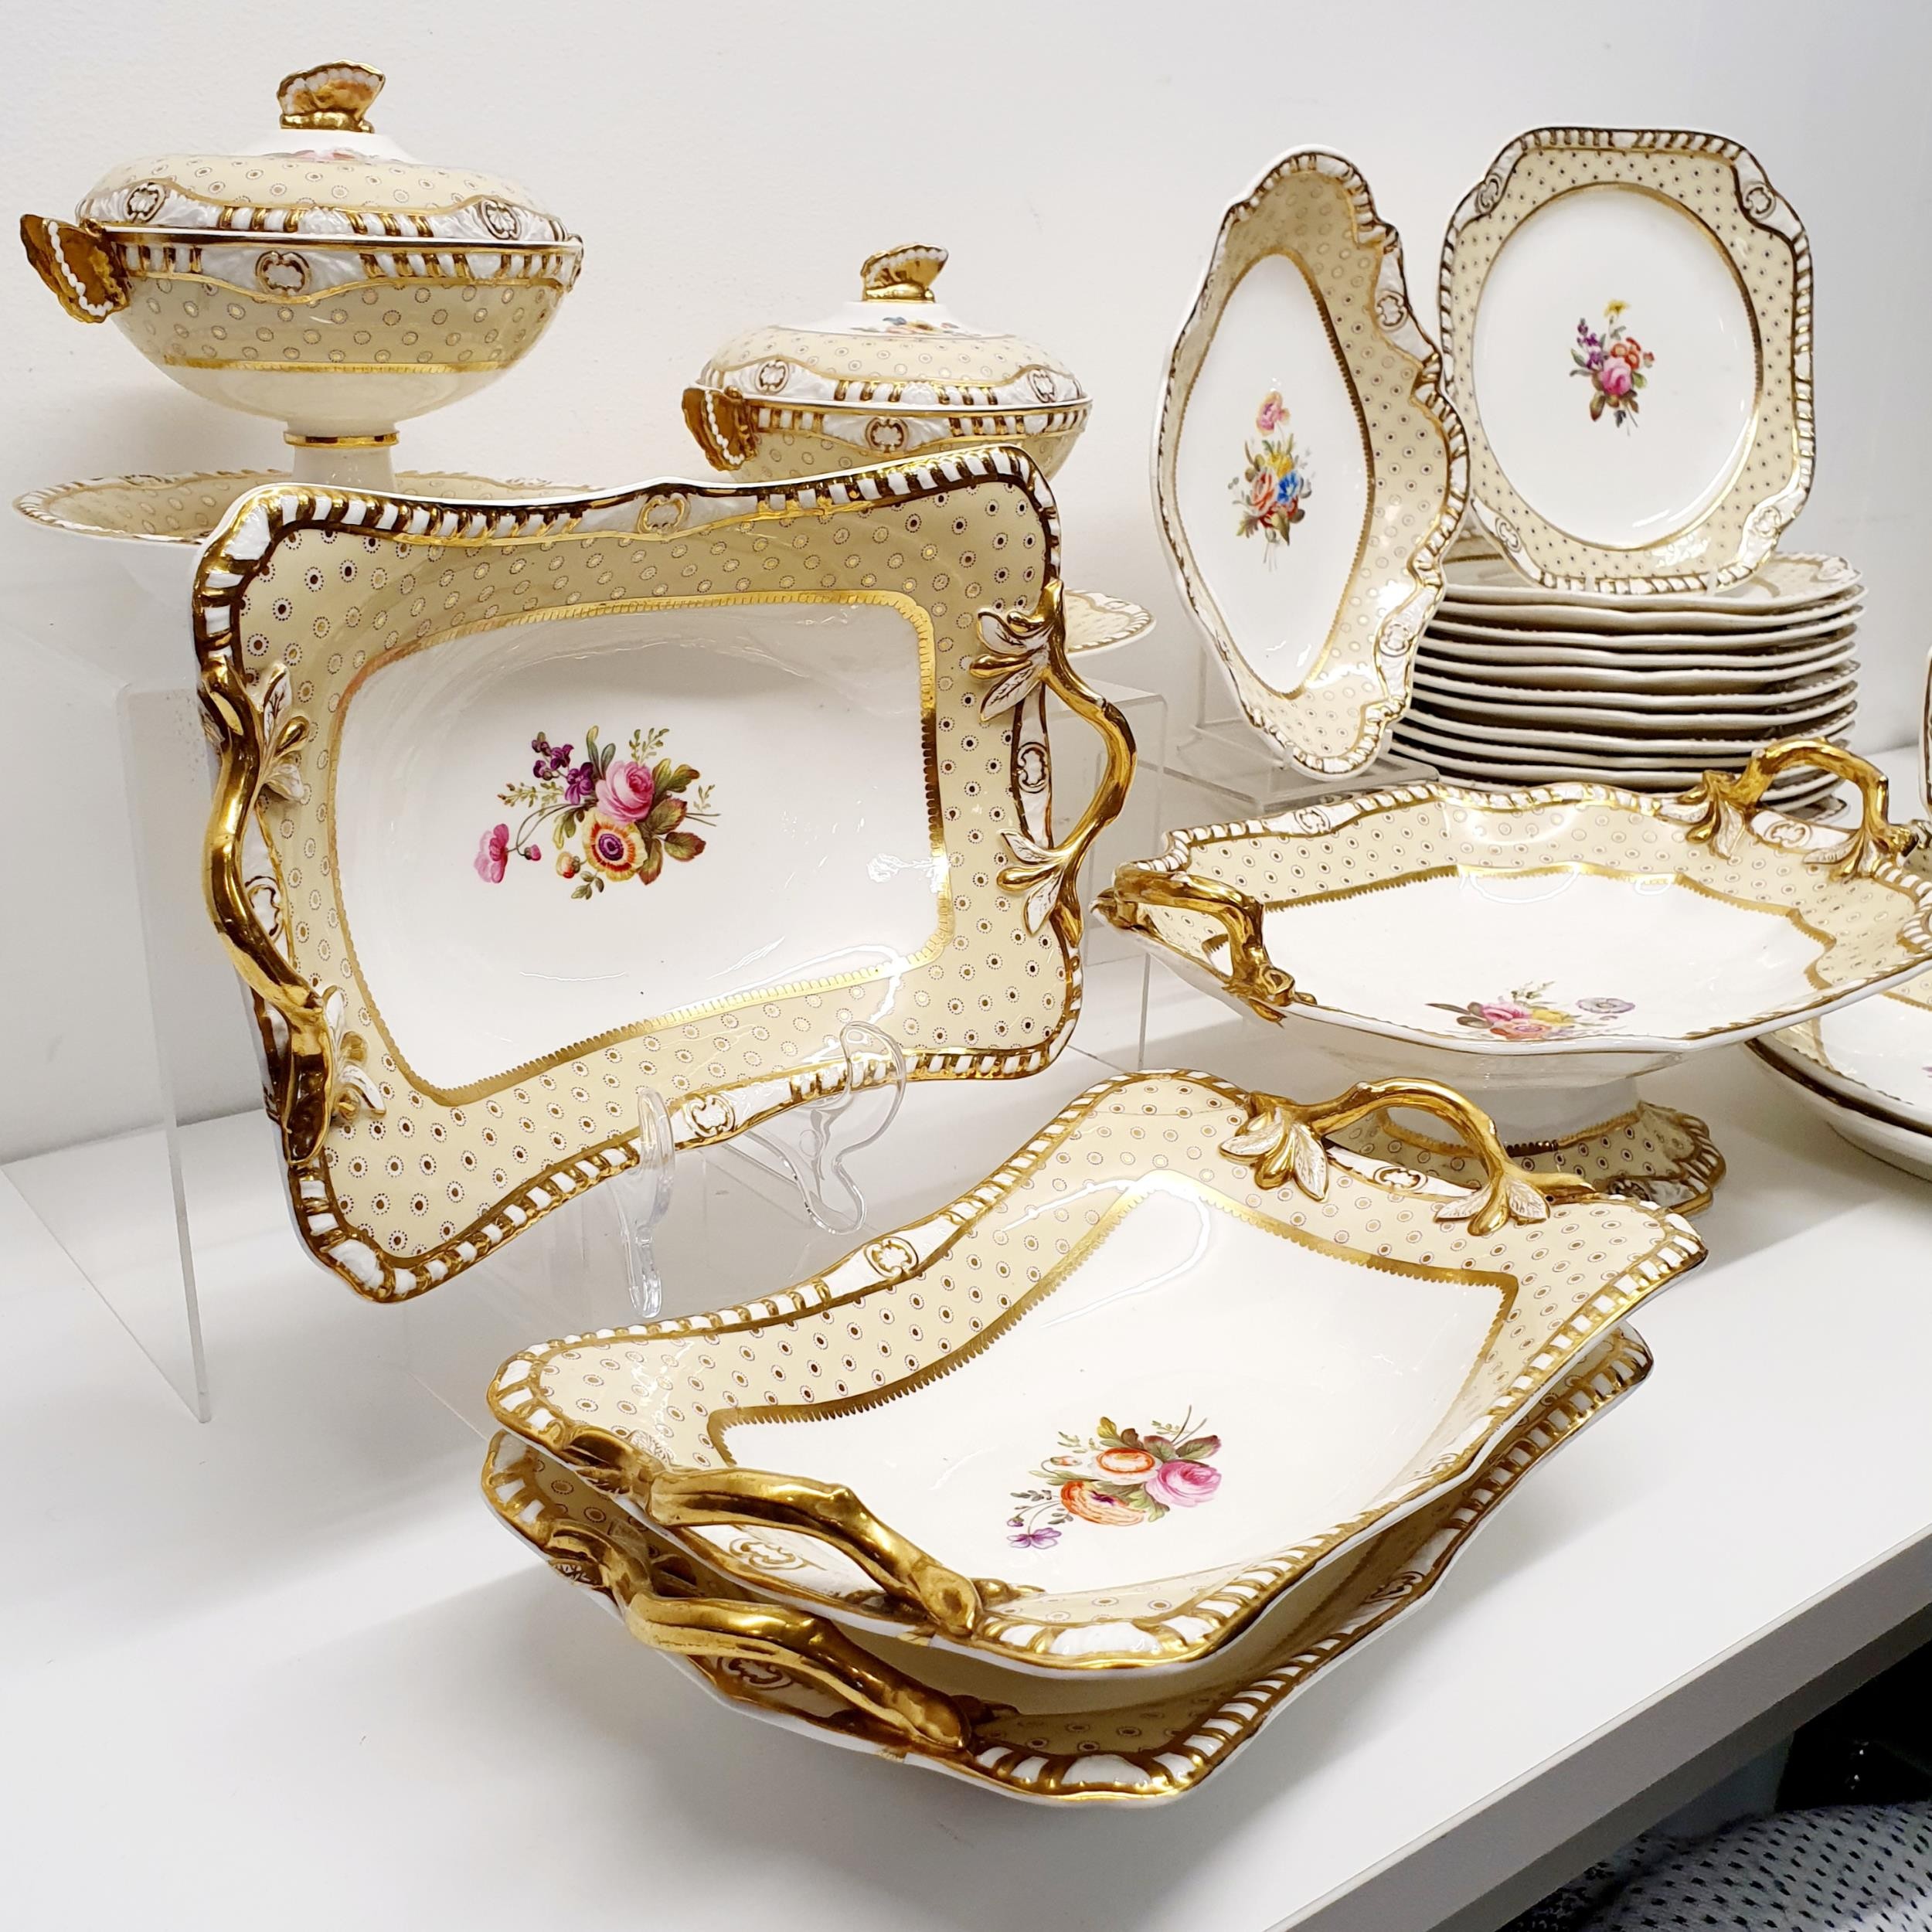 A 19th century Spode part dessert service, with a yellow border, centre decorated flowers, - Image 2 of 9